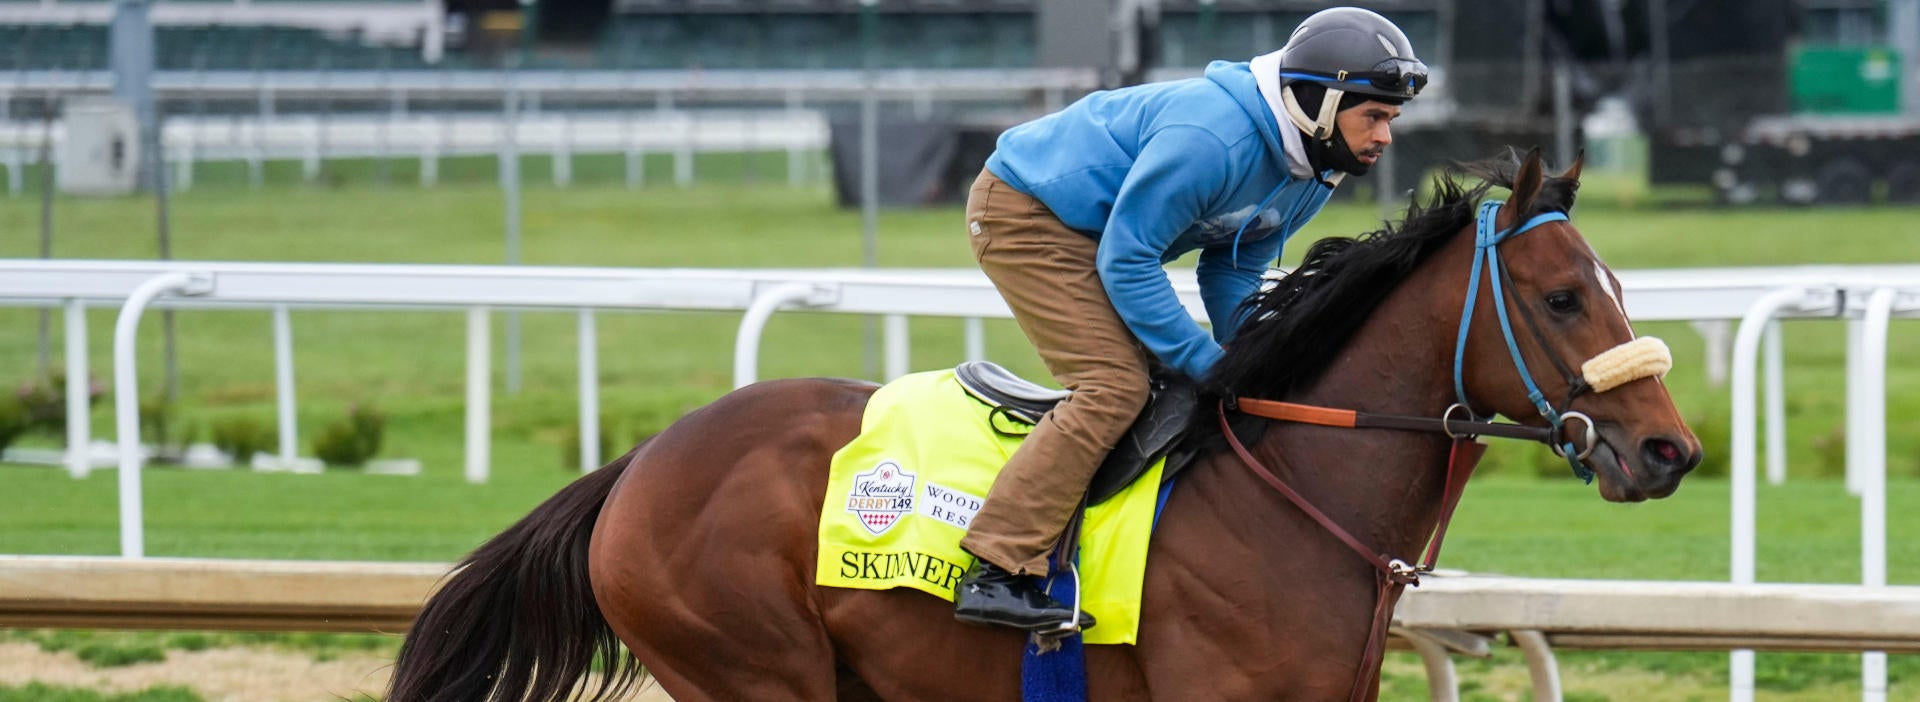 Skinner profile 2023 Kentucky Derby odds, post position, history and